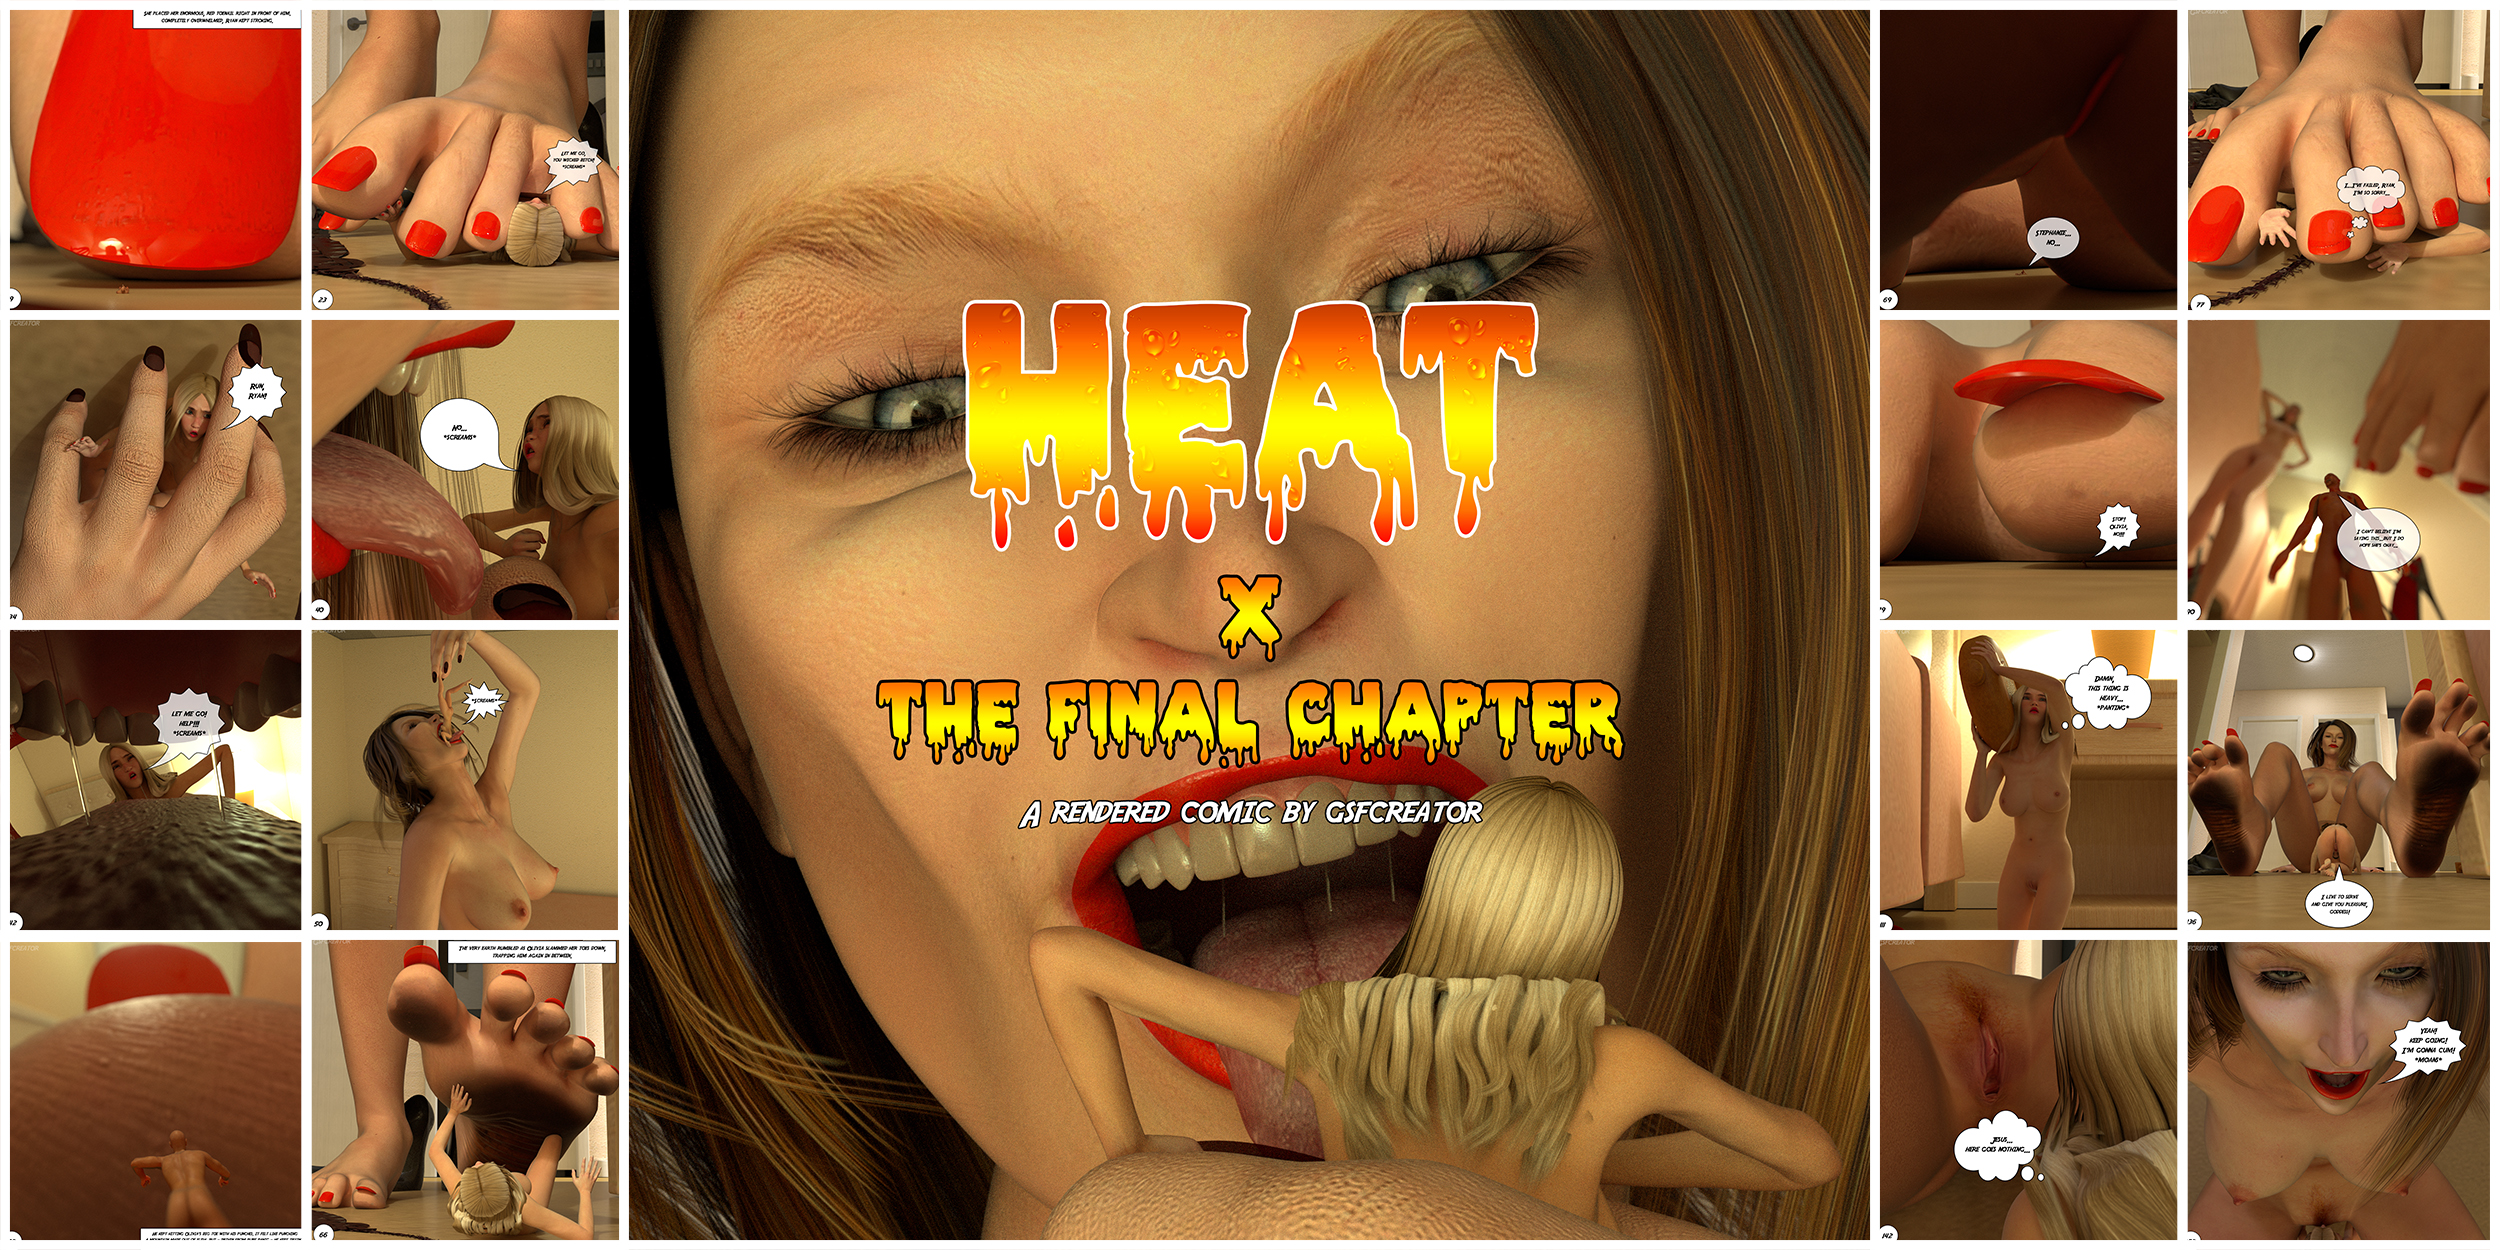 It's finally here, the final chapter of Heat saga
<br><br>
Things look quite desperate for both Ryan & Stephanie, being at the mercy of Ryan's wicked wife, Olivia. in the greatest hour of need, will the seeds of true love be sufficient to save them both from utter doom?
<br><br>
This is it, for now. 10 chapters and more than two years in the making, Heat comes to its conclusion. I hope you enjoyed the ride, and on to the next one!
<br><br>
212 images, 2500*2500 each
<br><br>
Giantess, shrinking, shrunken woman, micro shrink, foot fetish, vore, dirty feet, explicitly sexual scenes.